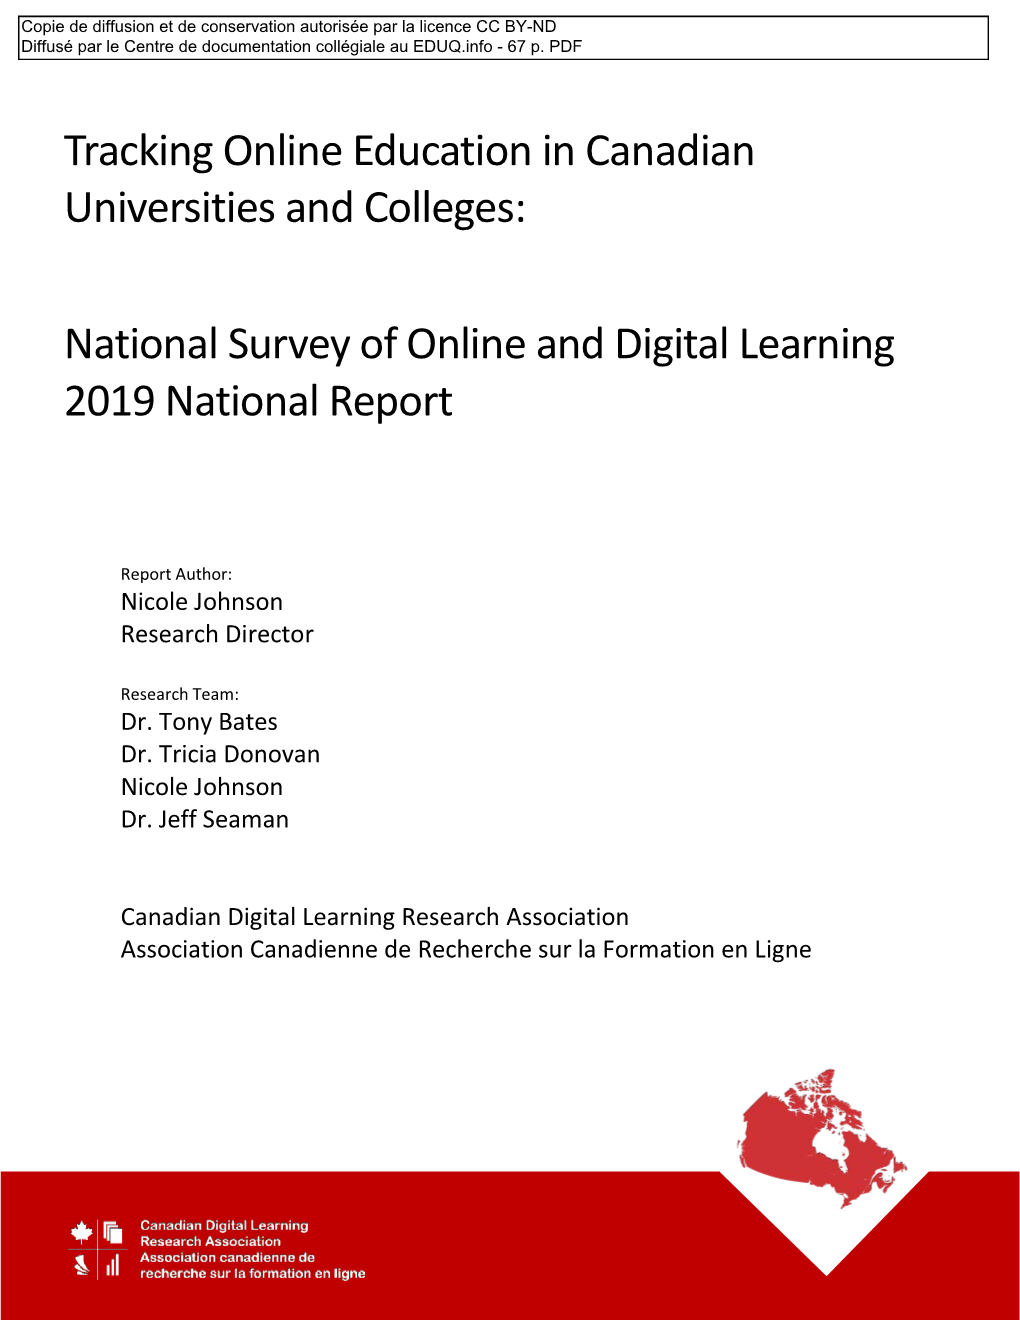 Tracking Online Education in Canadian Universities and Colleges